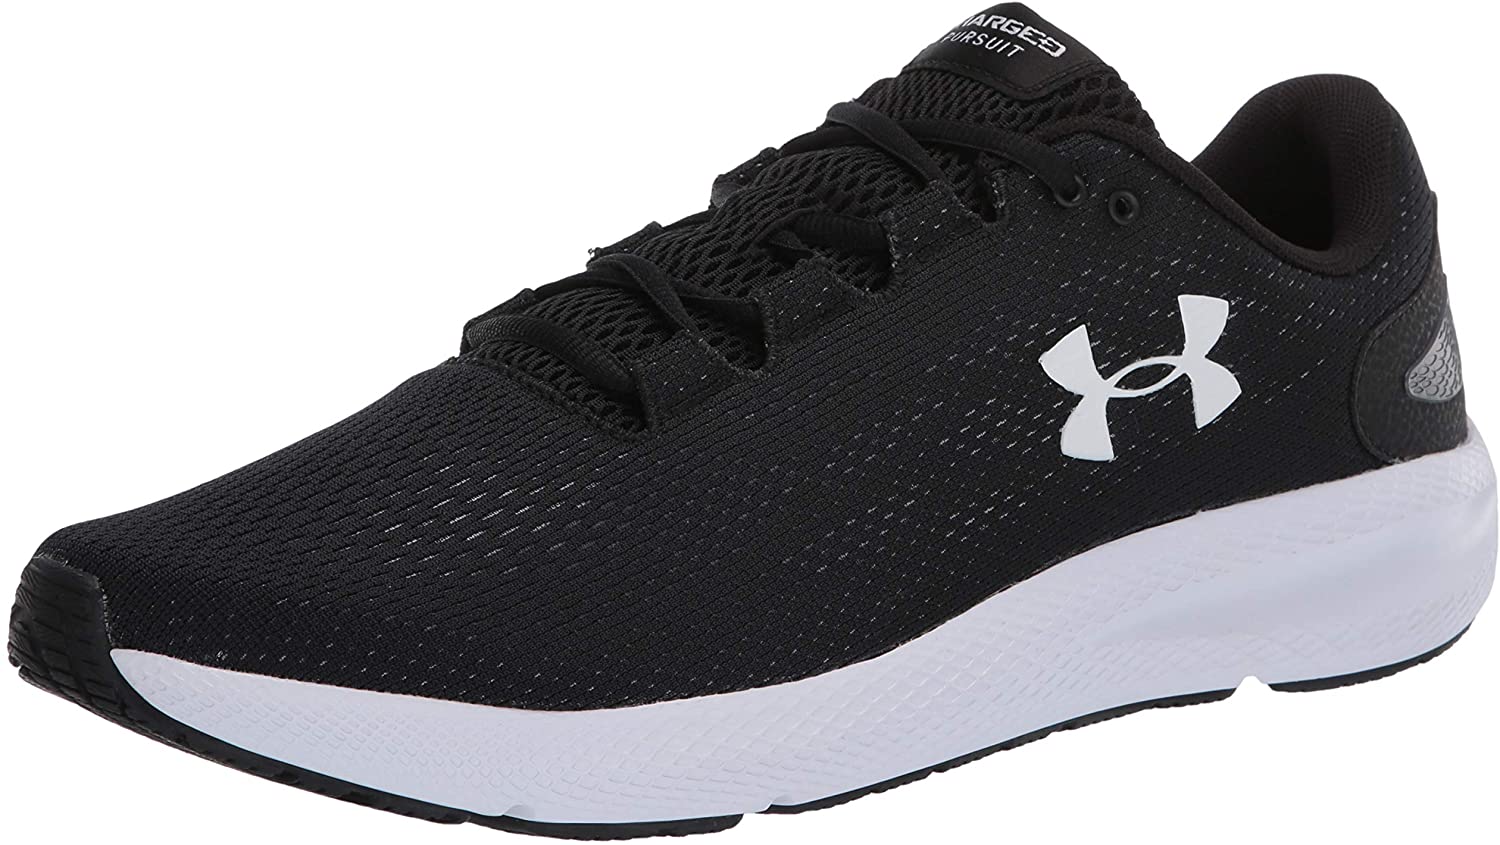 Under Armour Men’s Charged Pursuit 2 Running Shoes